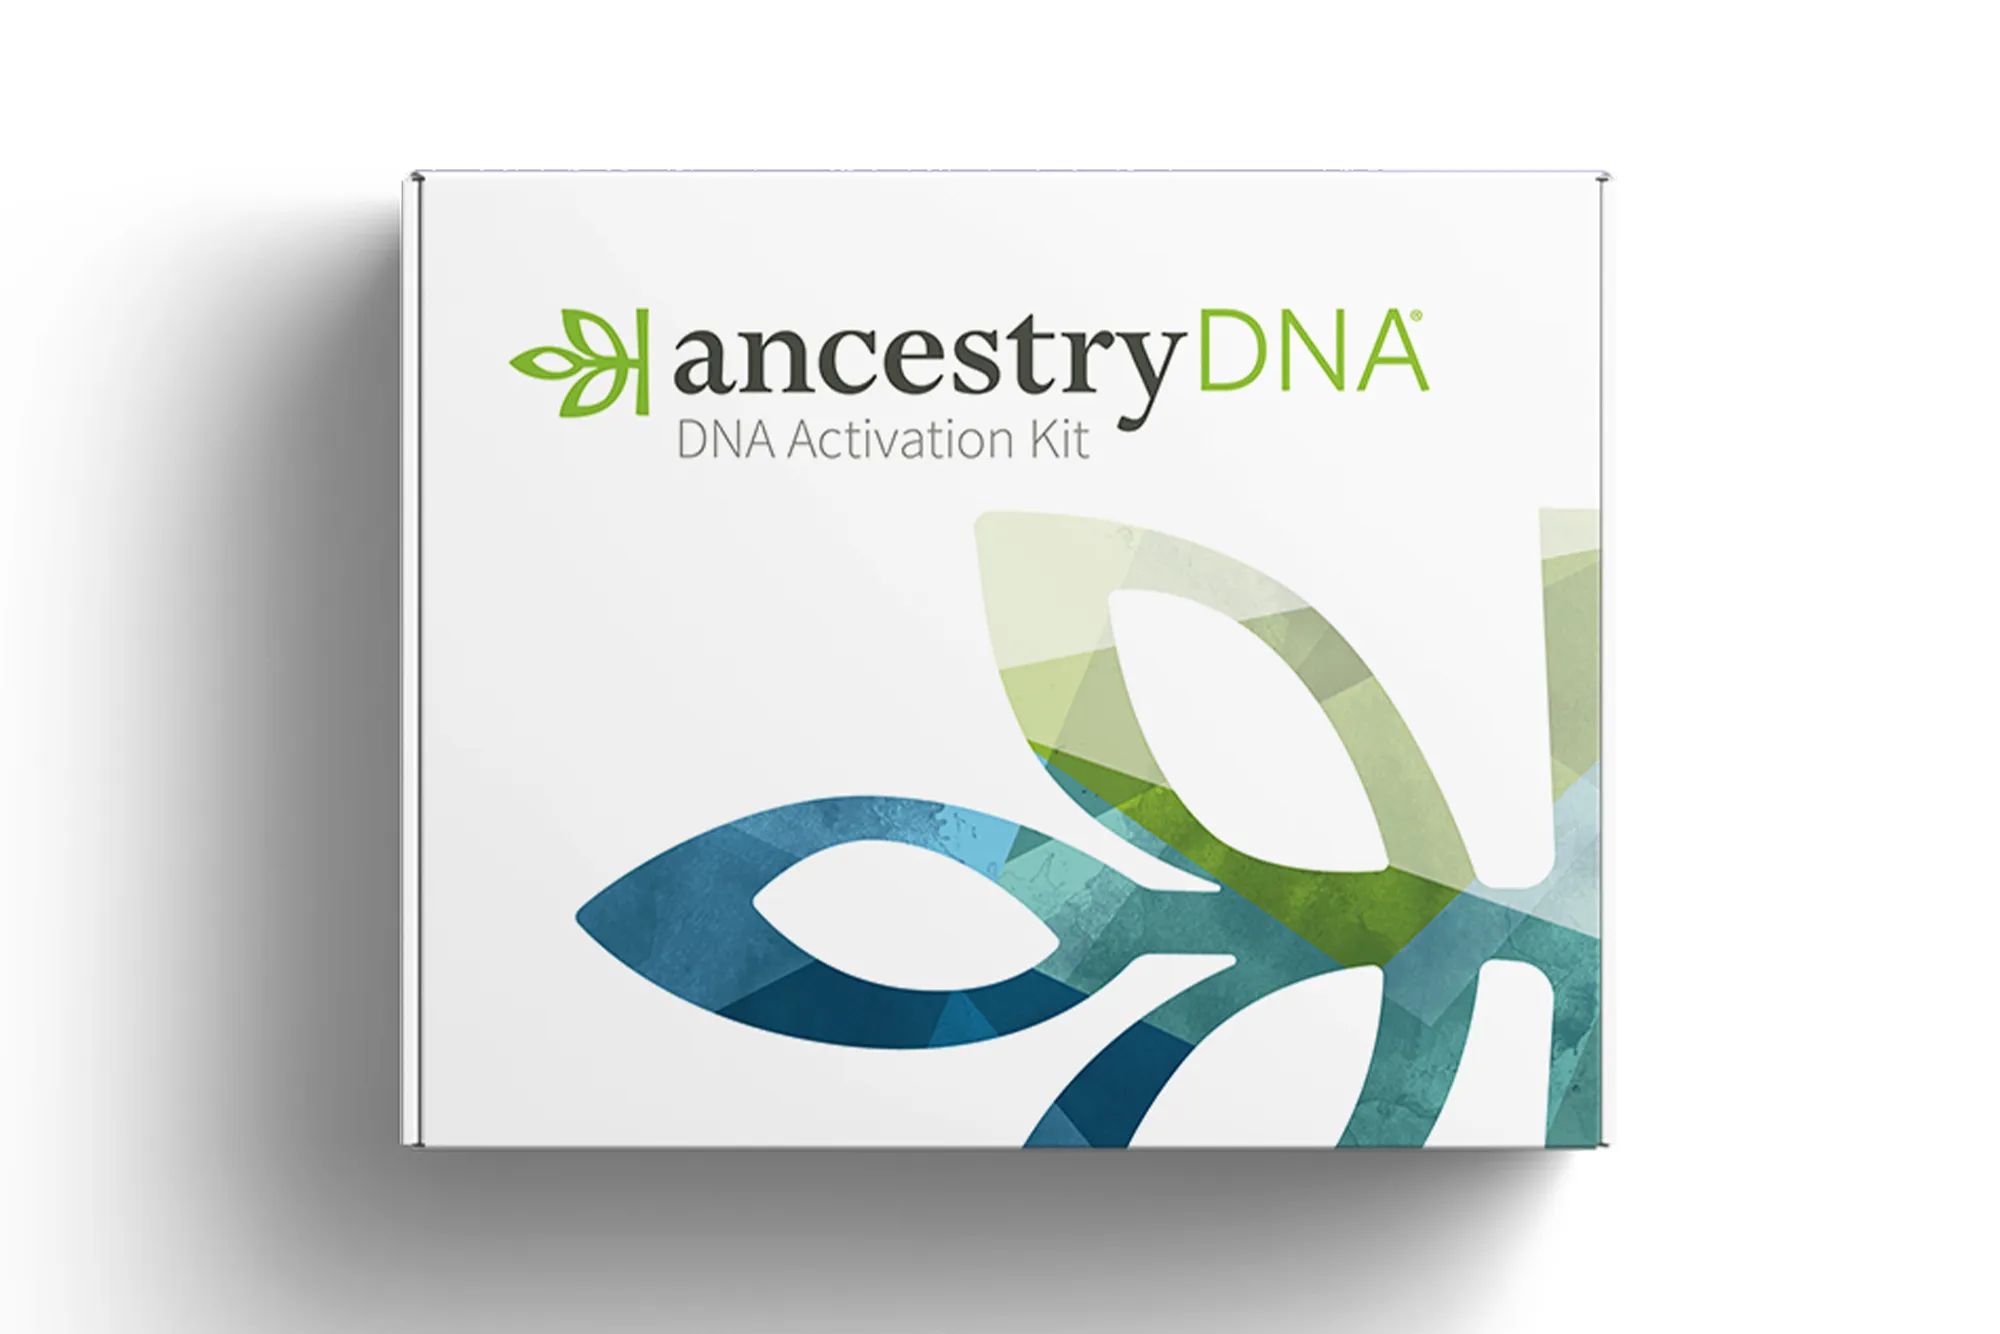 19 Mind-blowing Facts About Ancestry.com 